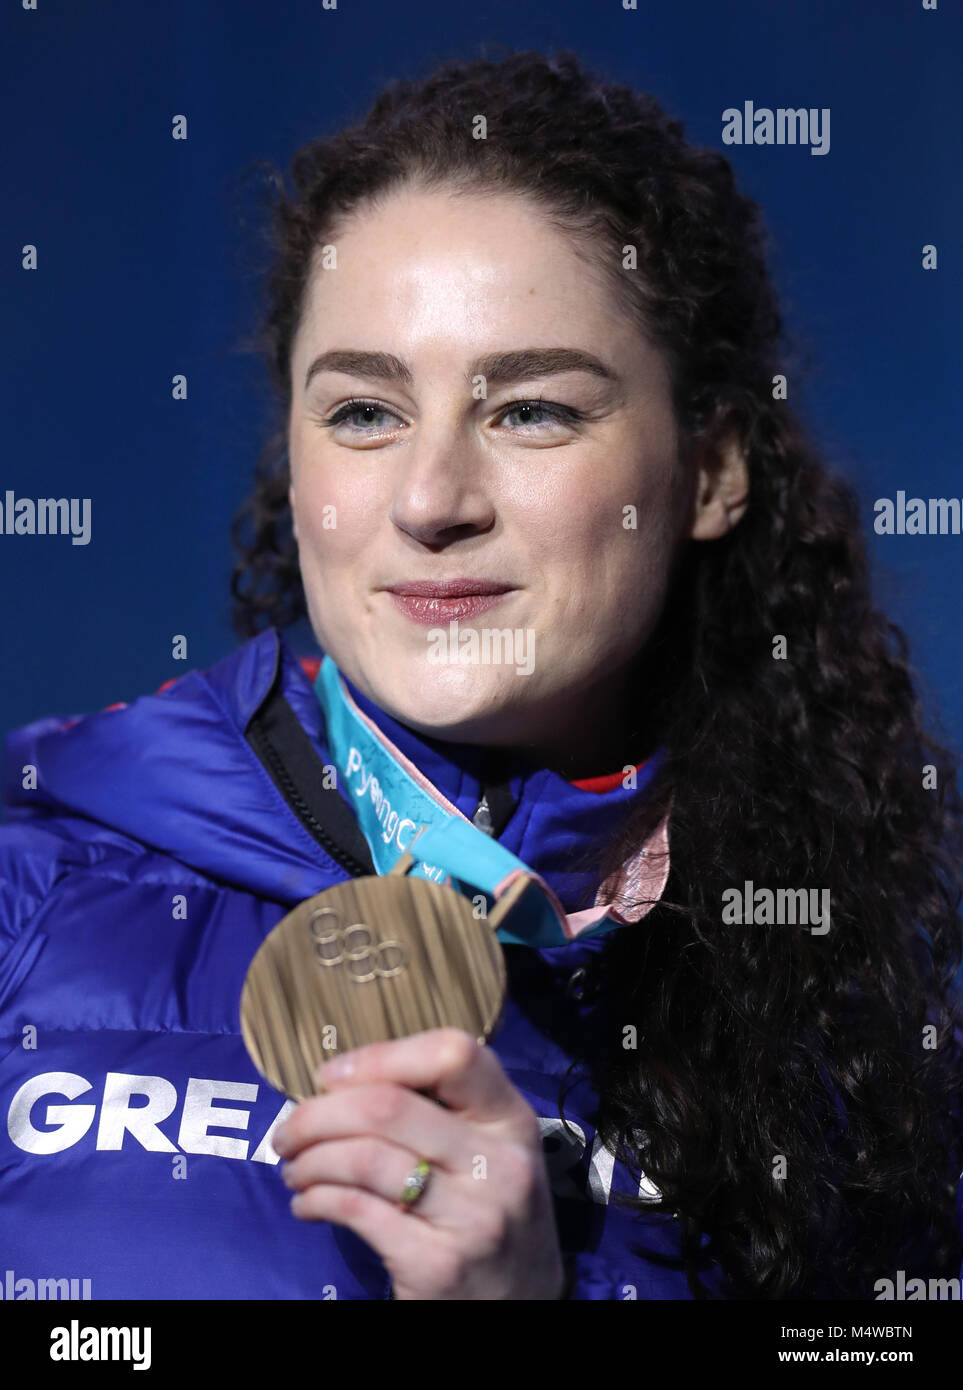 Great Britain's Laura Deas poses with her bronze medal during the medal ceremony for the Women's Skeleton on day nine of the PyeongChang 2018 Winter Olympic Games in South Korea. Stock Photo